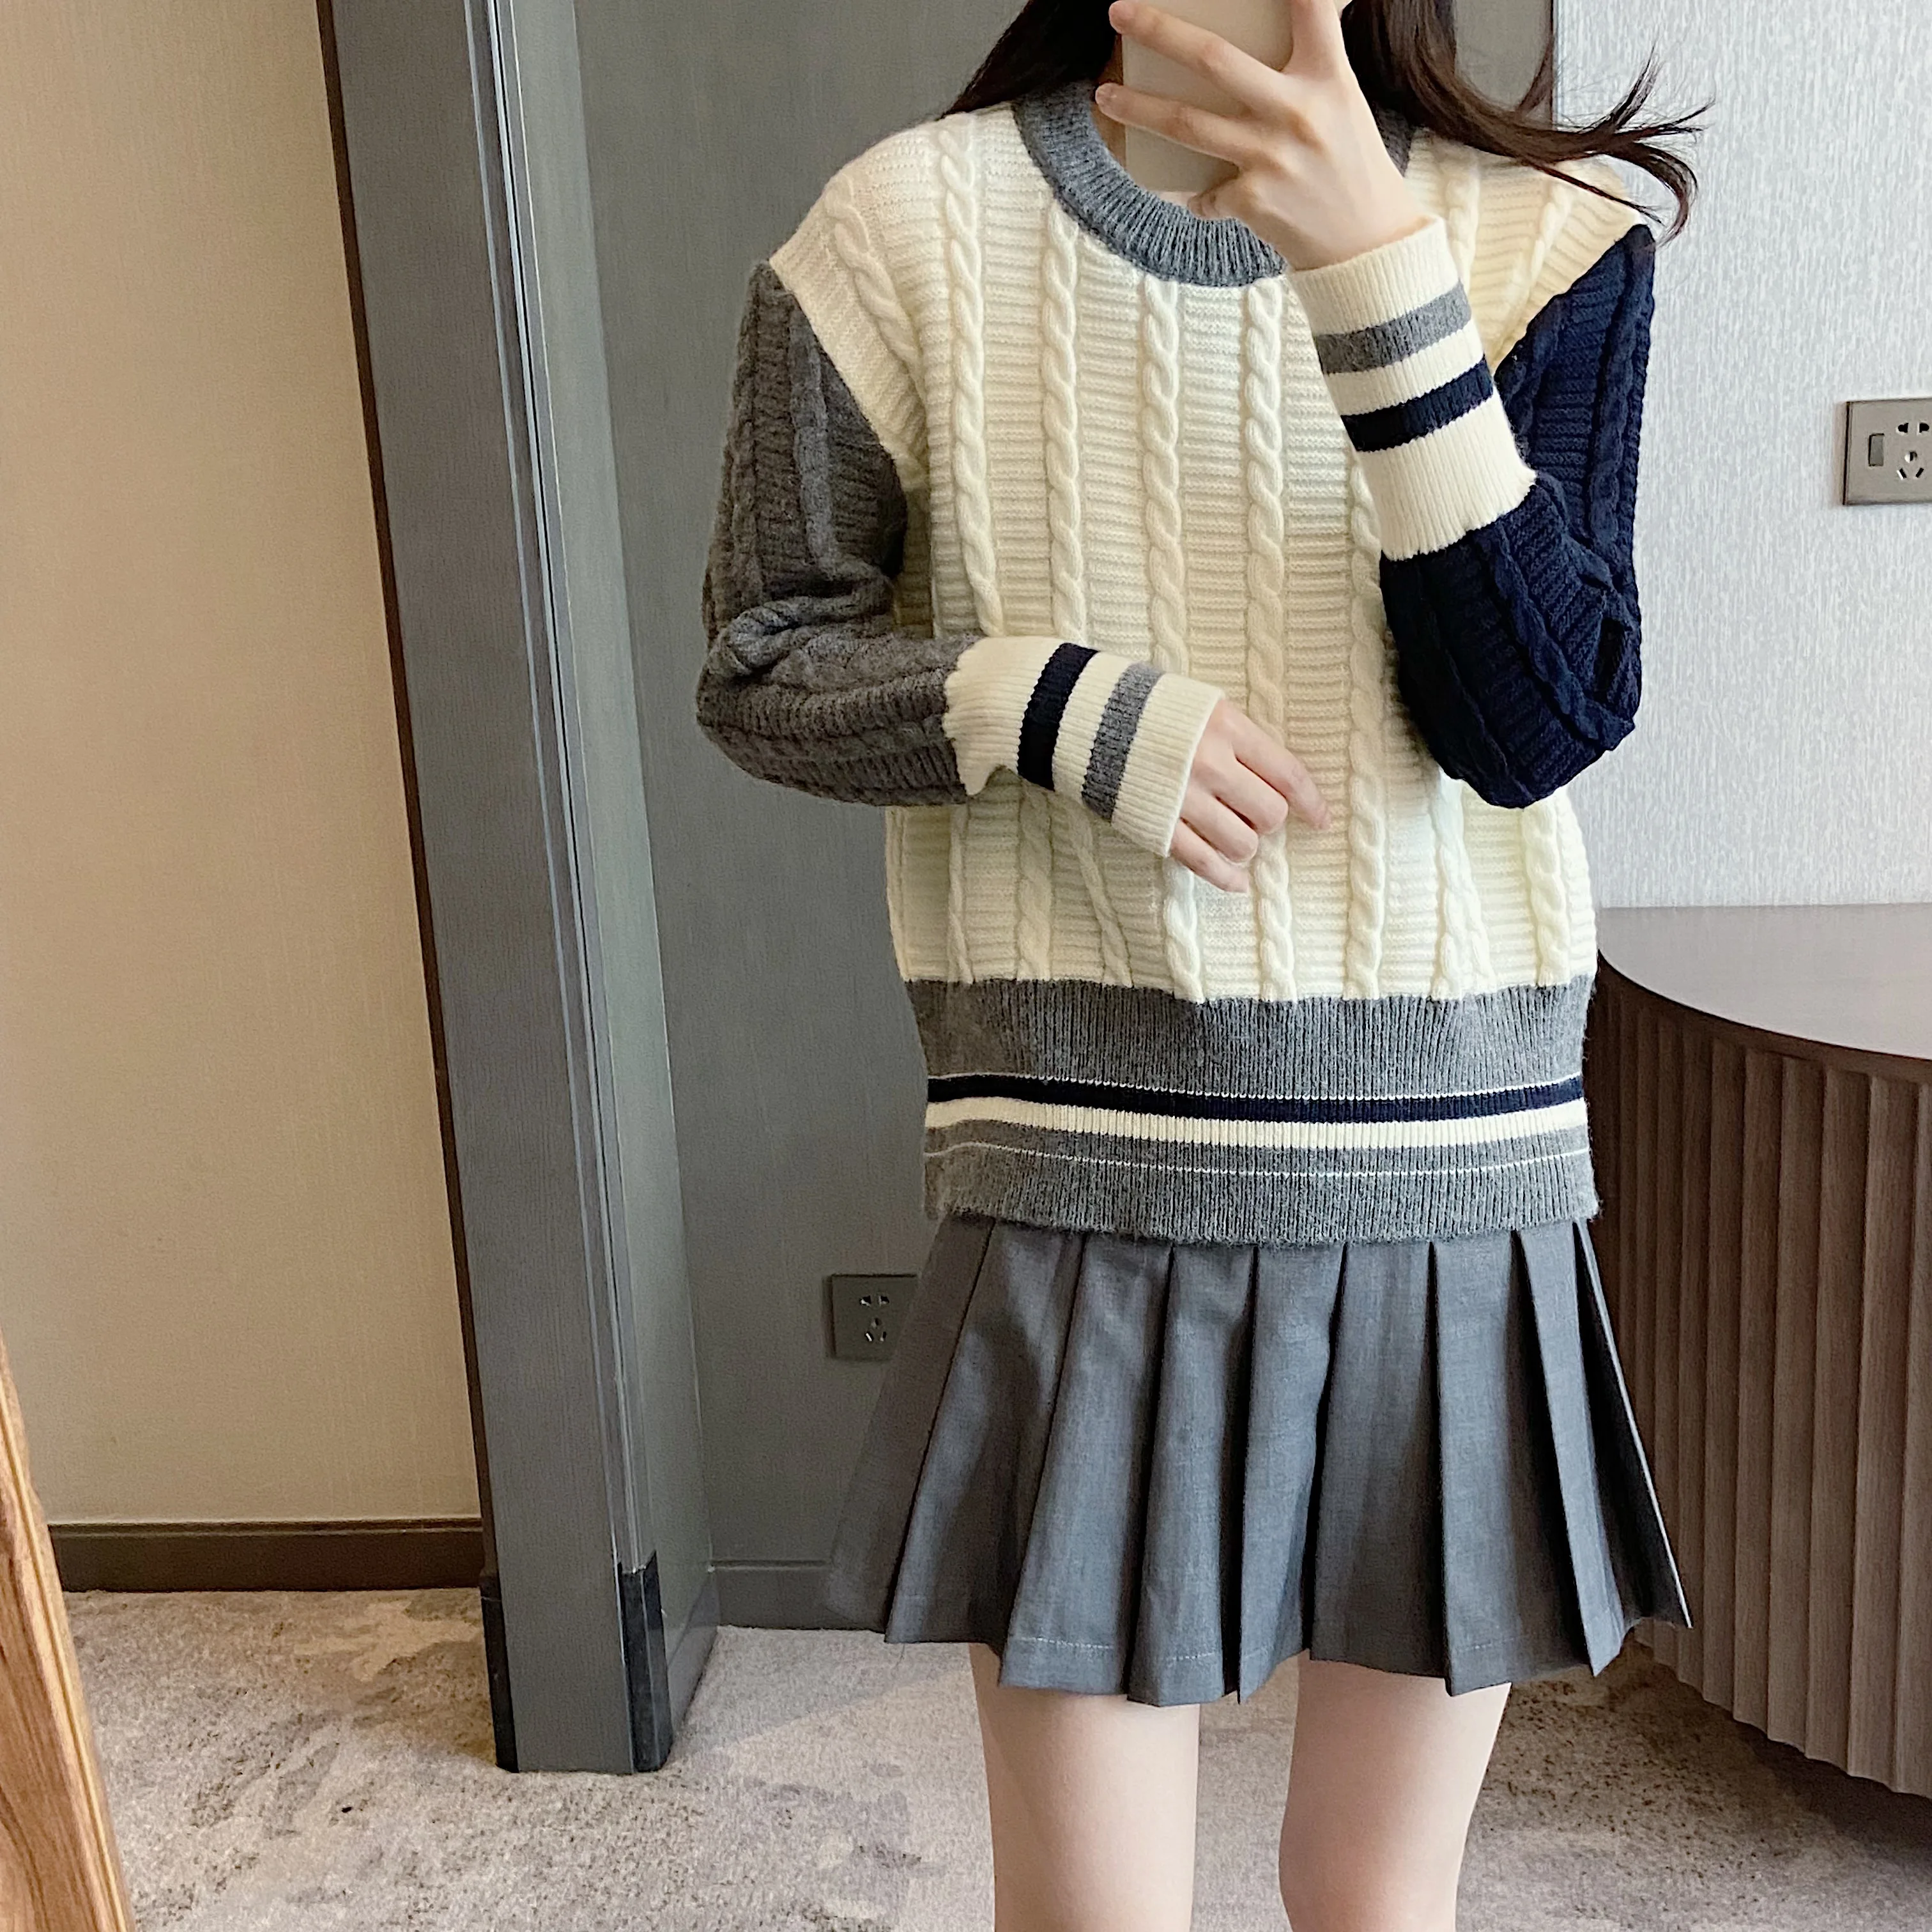 TB High Quality Korean Fashion Women's Twist Minority Color Matching Wool Knitting Pullover Top